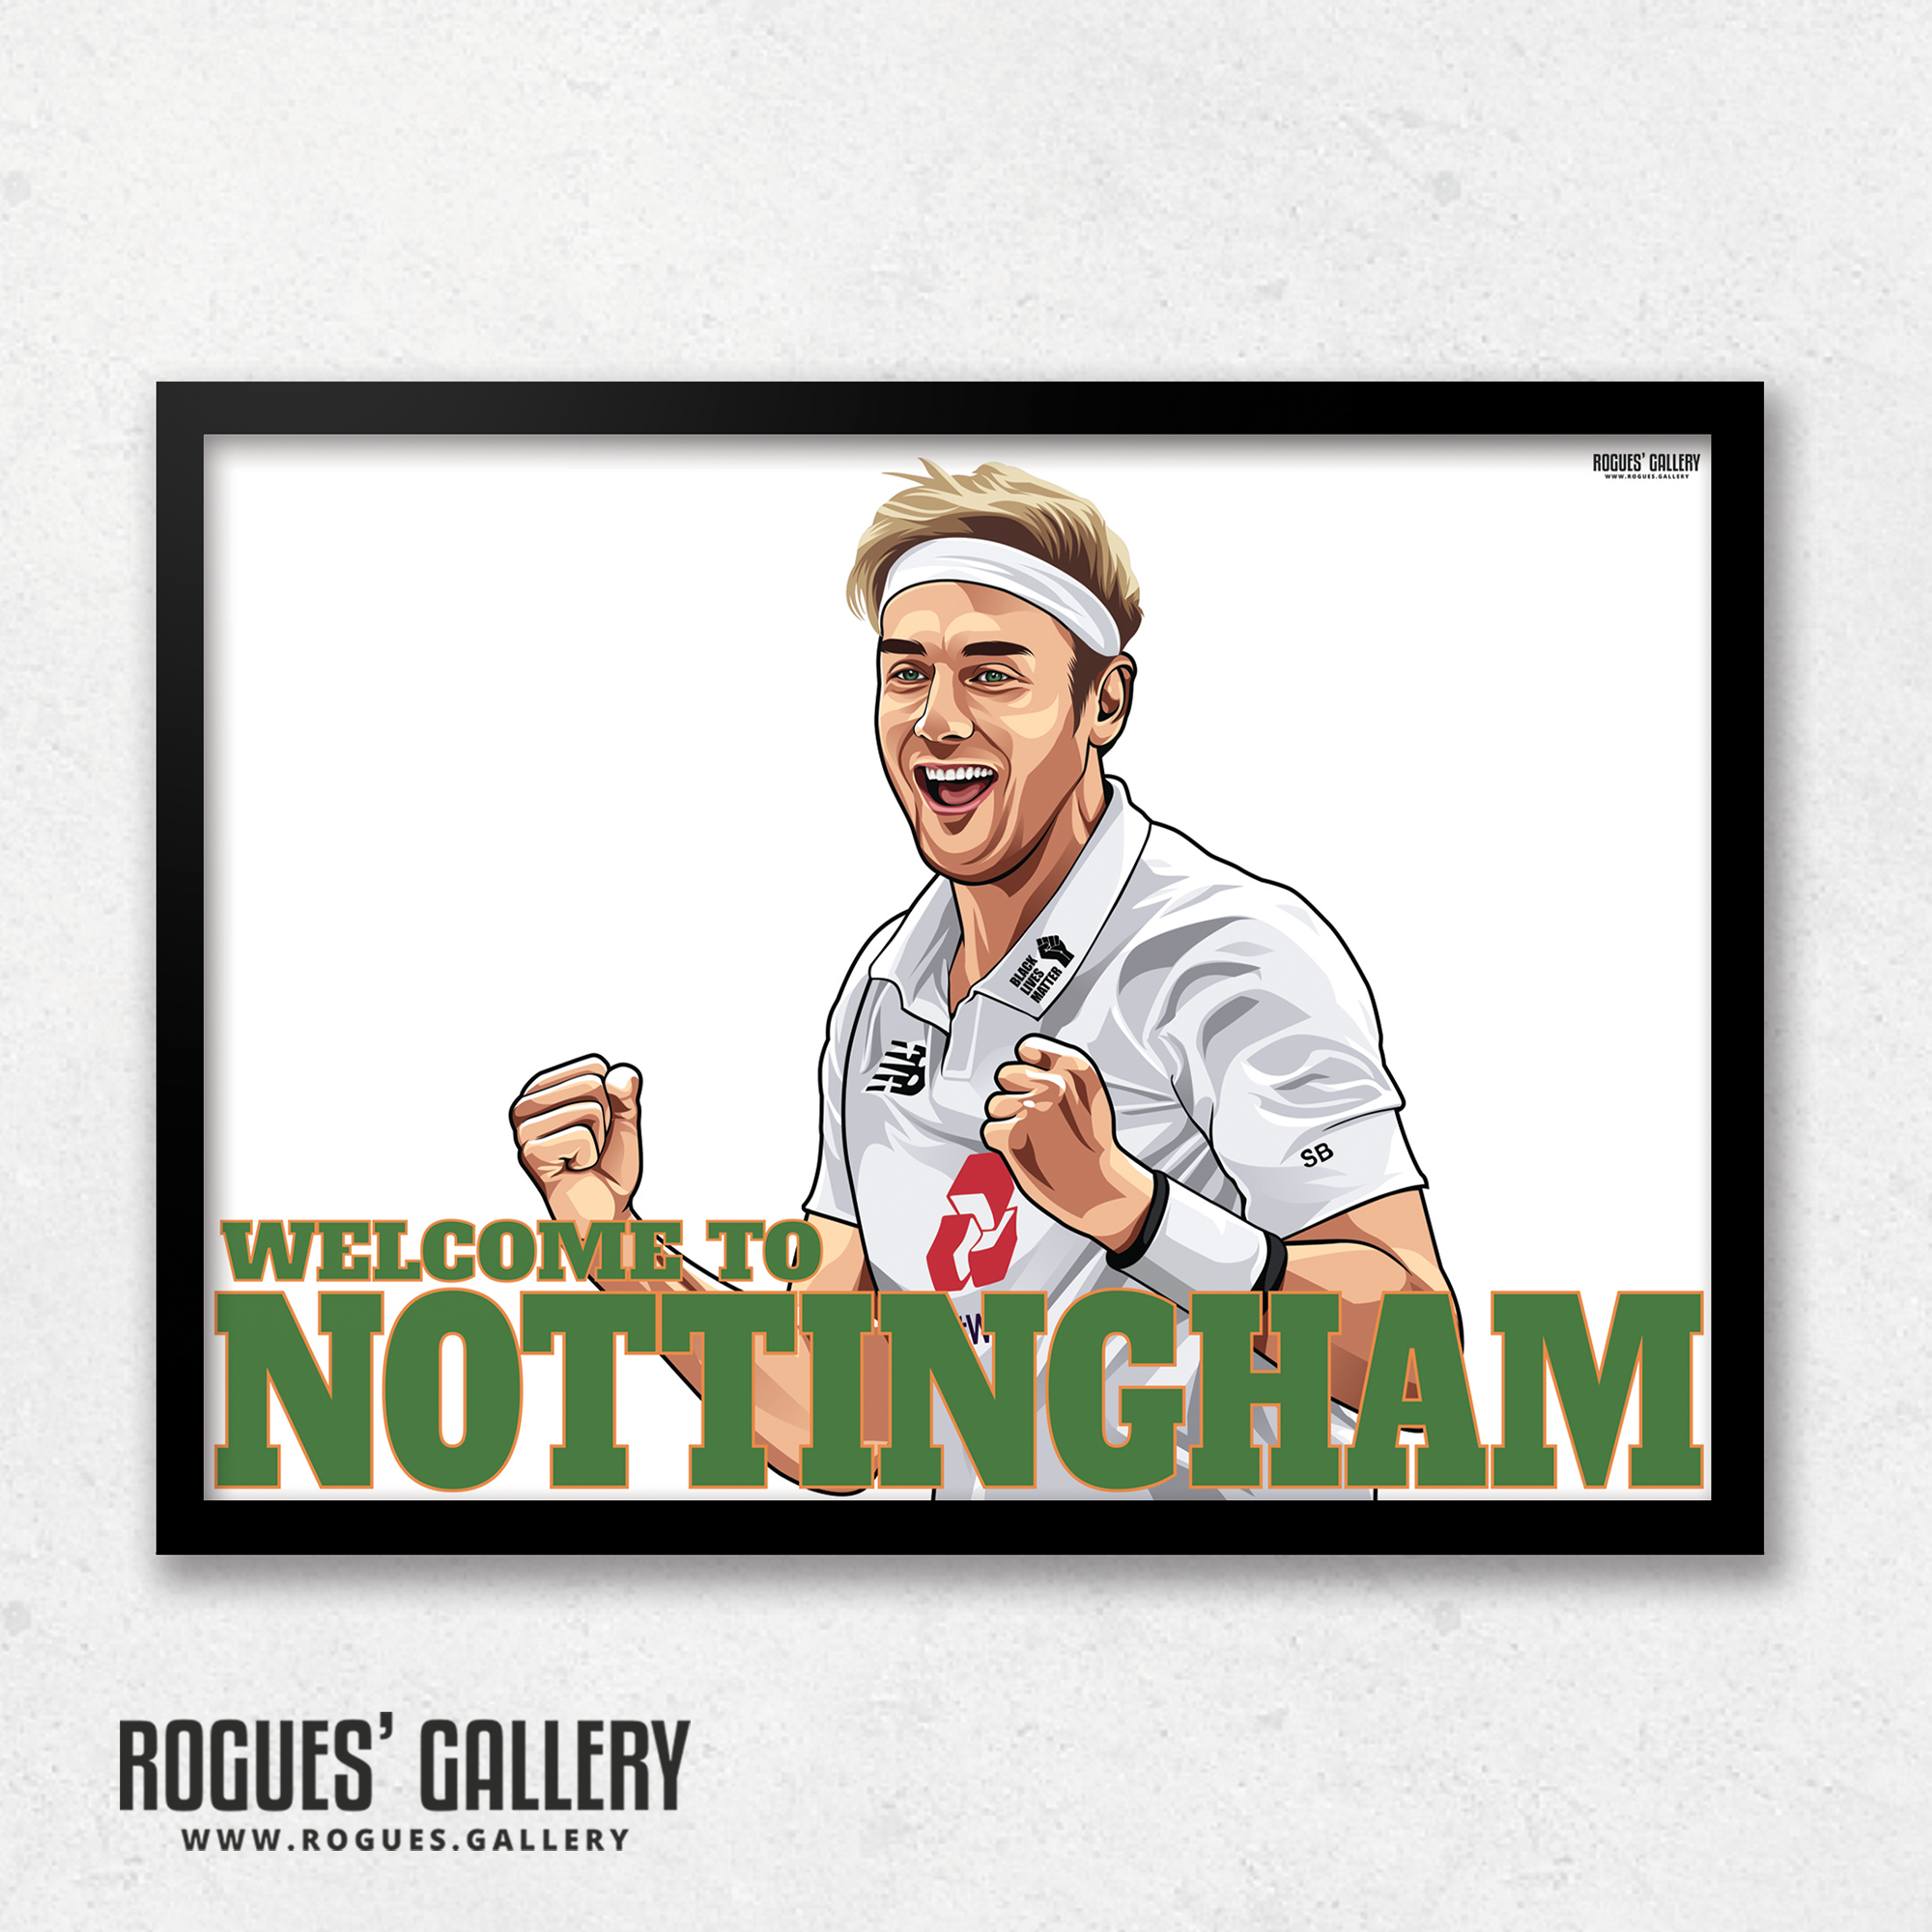 Stuart Broad Welcome To Nottingham Notts CCC Trent Bridge cricketer bowler England Barmy Army 500 wickets A3 art print great